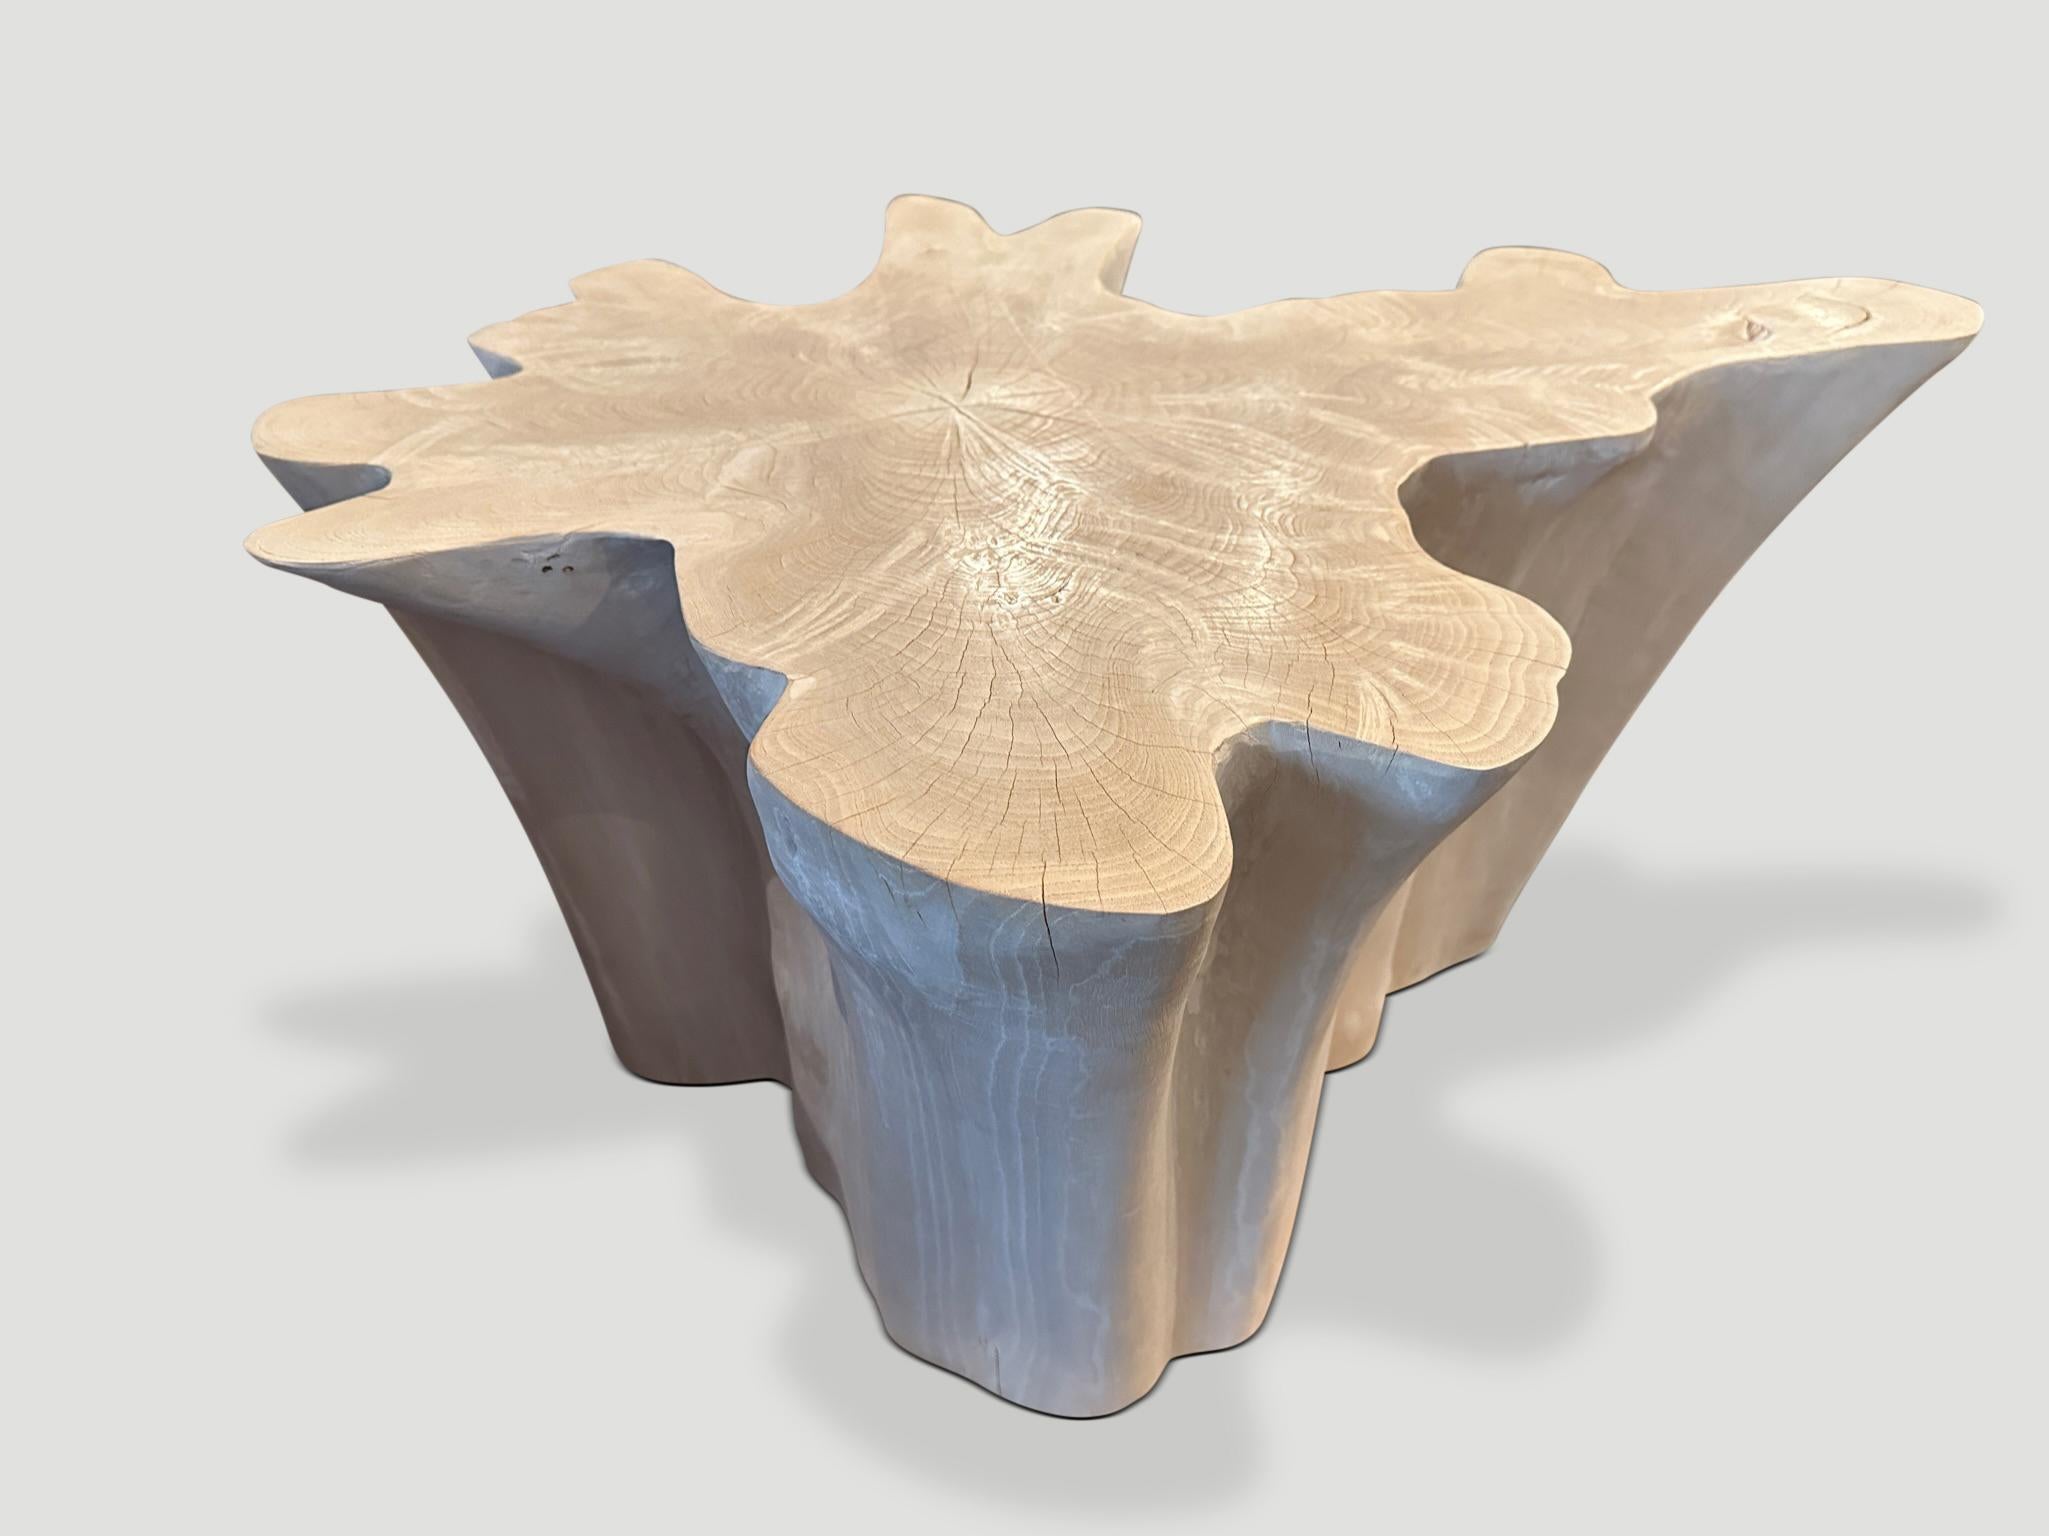 Impressive reclaimed bleached teak amorphous coffee table. A slight graduation from the bottom to the top. We have added a polish to the top for a slight bone contrast and protection revealing the beautiful wood grain.

The St. Barts Collection